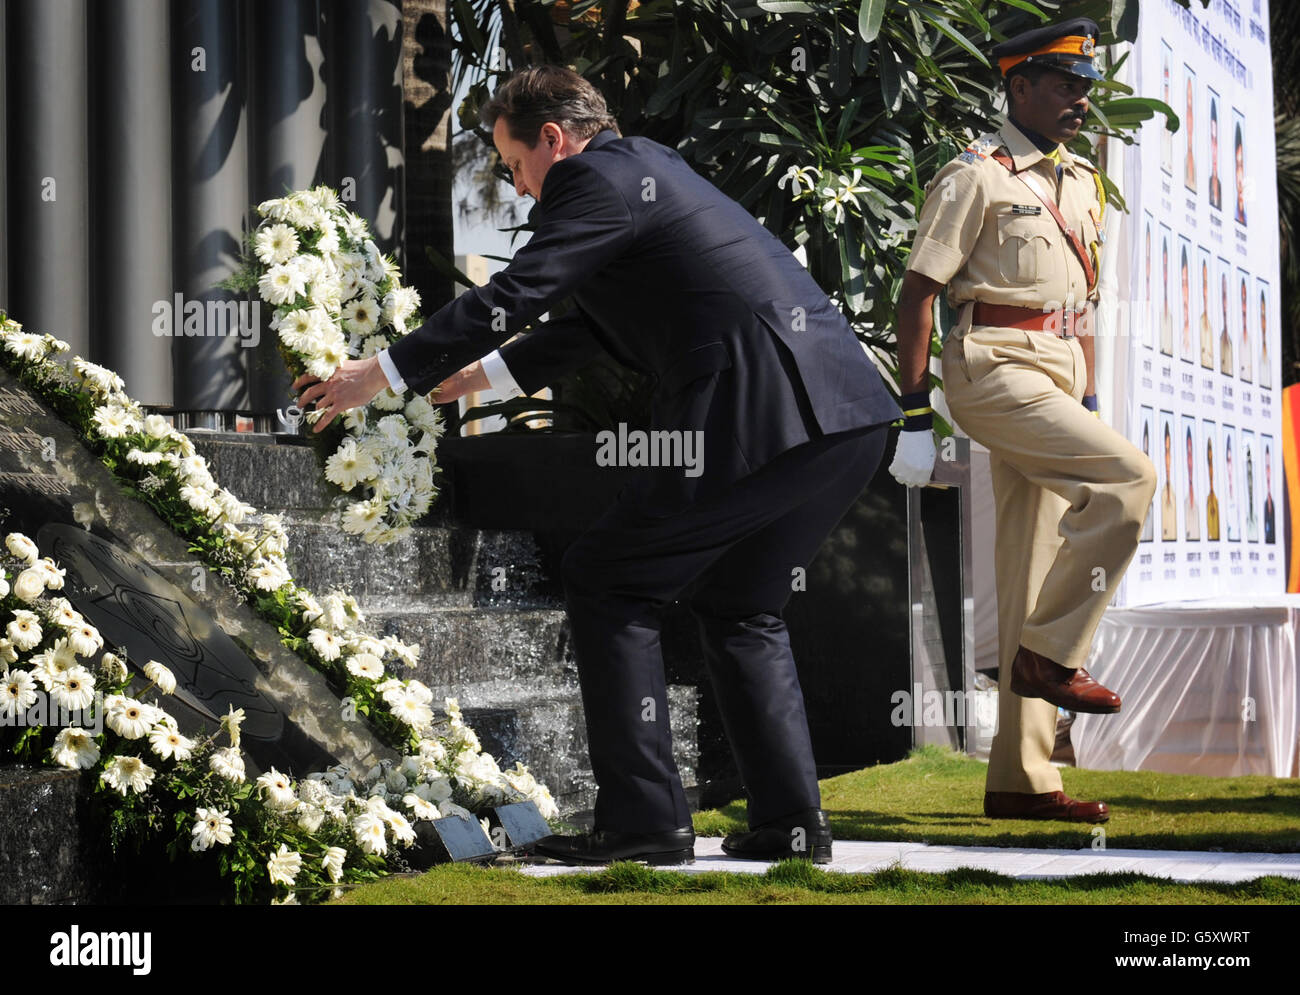 Prime Minister David Cameron lays a wreath at the memorial to commemorate the policemen who were killed in the terrorist attacks of November 2008, in Mumbai, India. Stock Photo